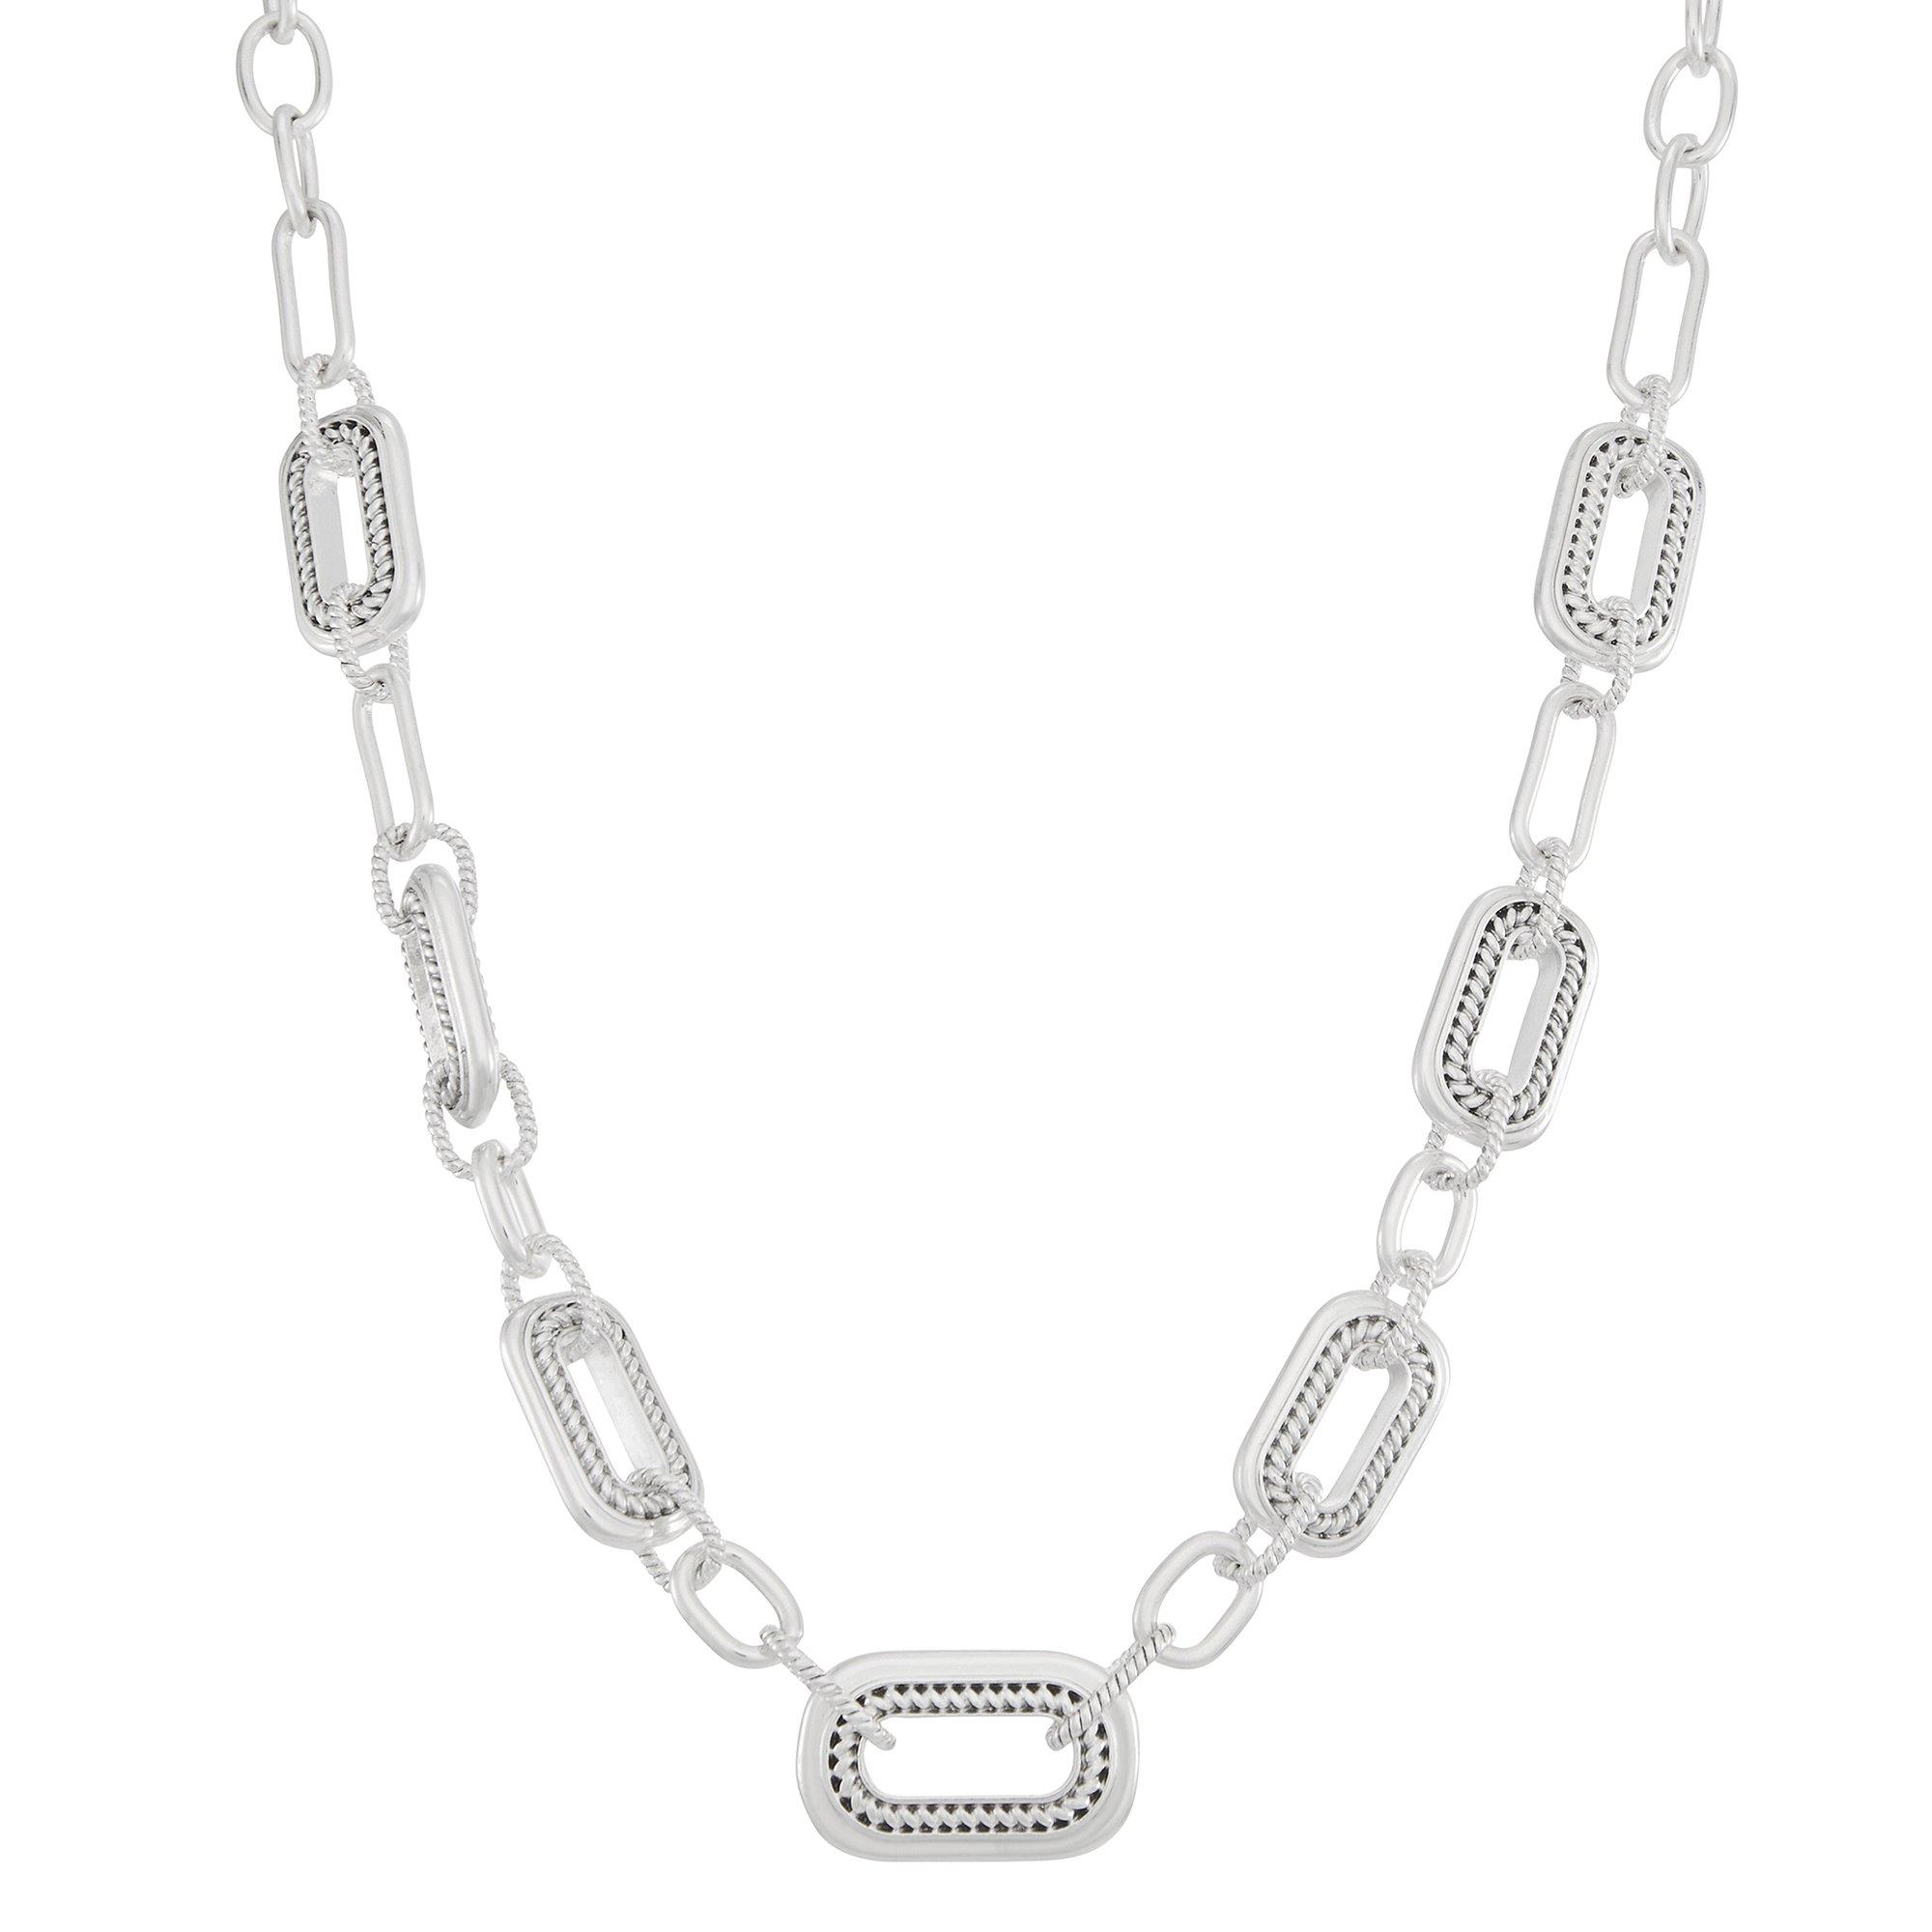 Napier Textured Oval Link Chain Necklace